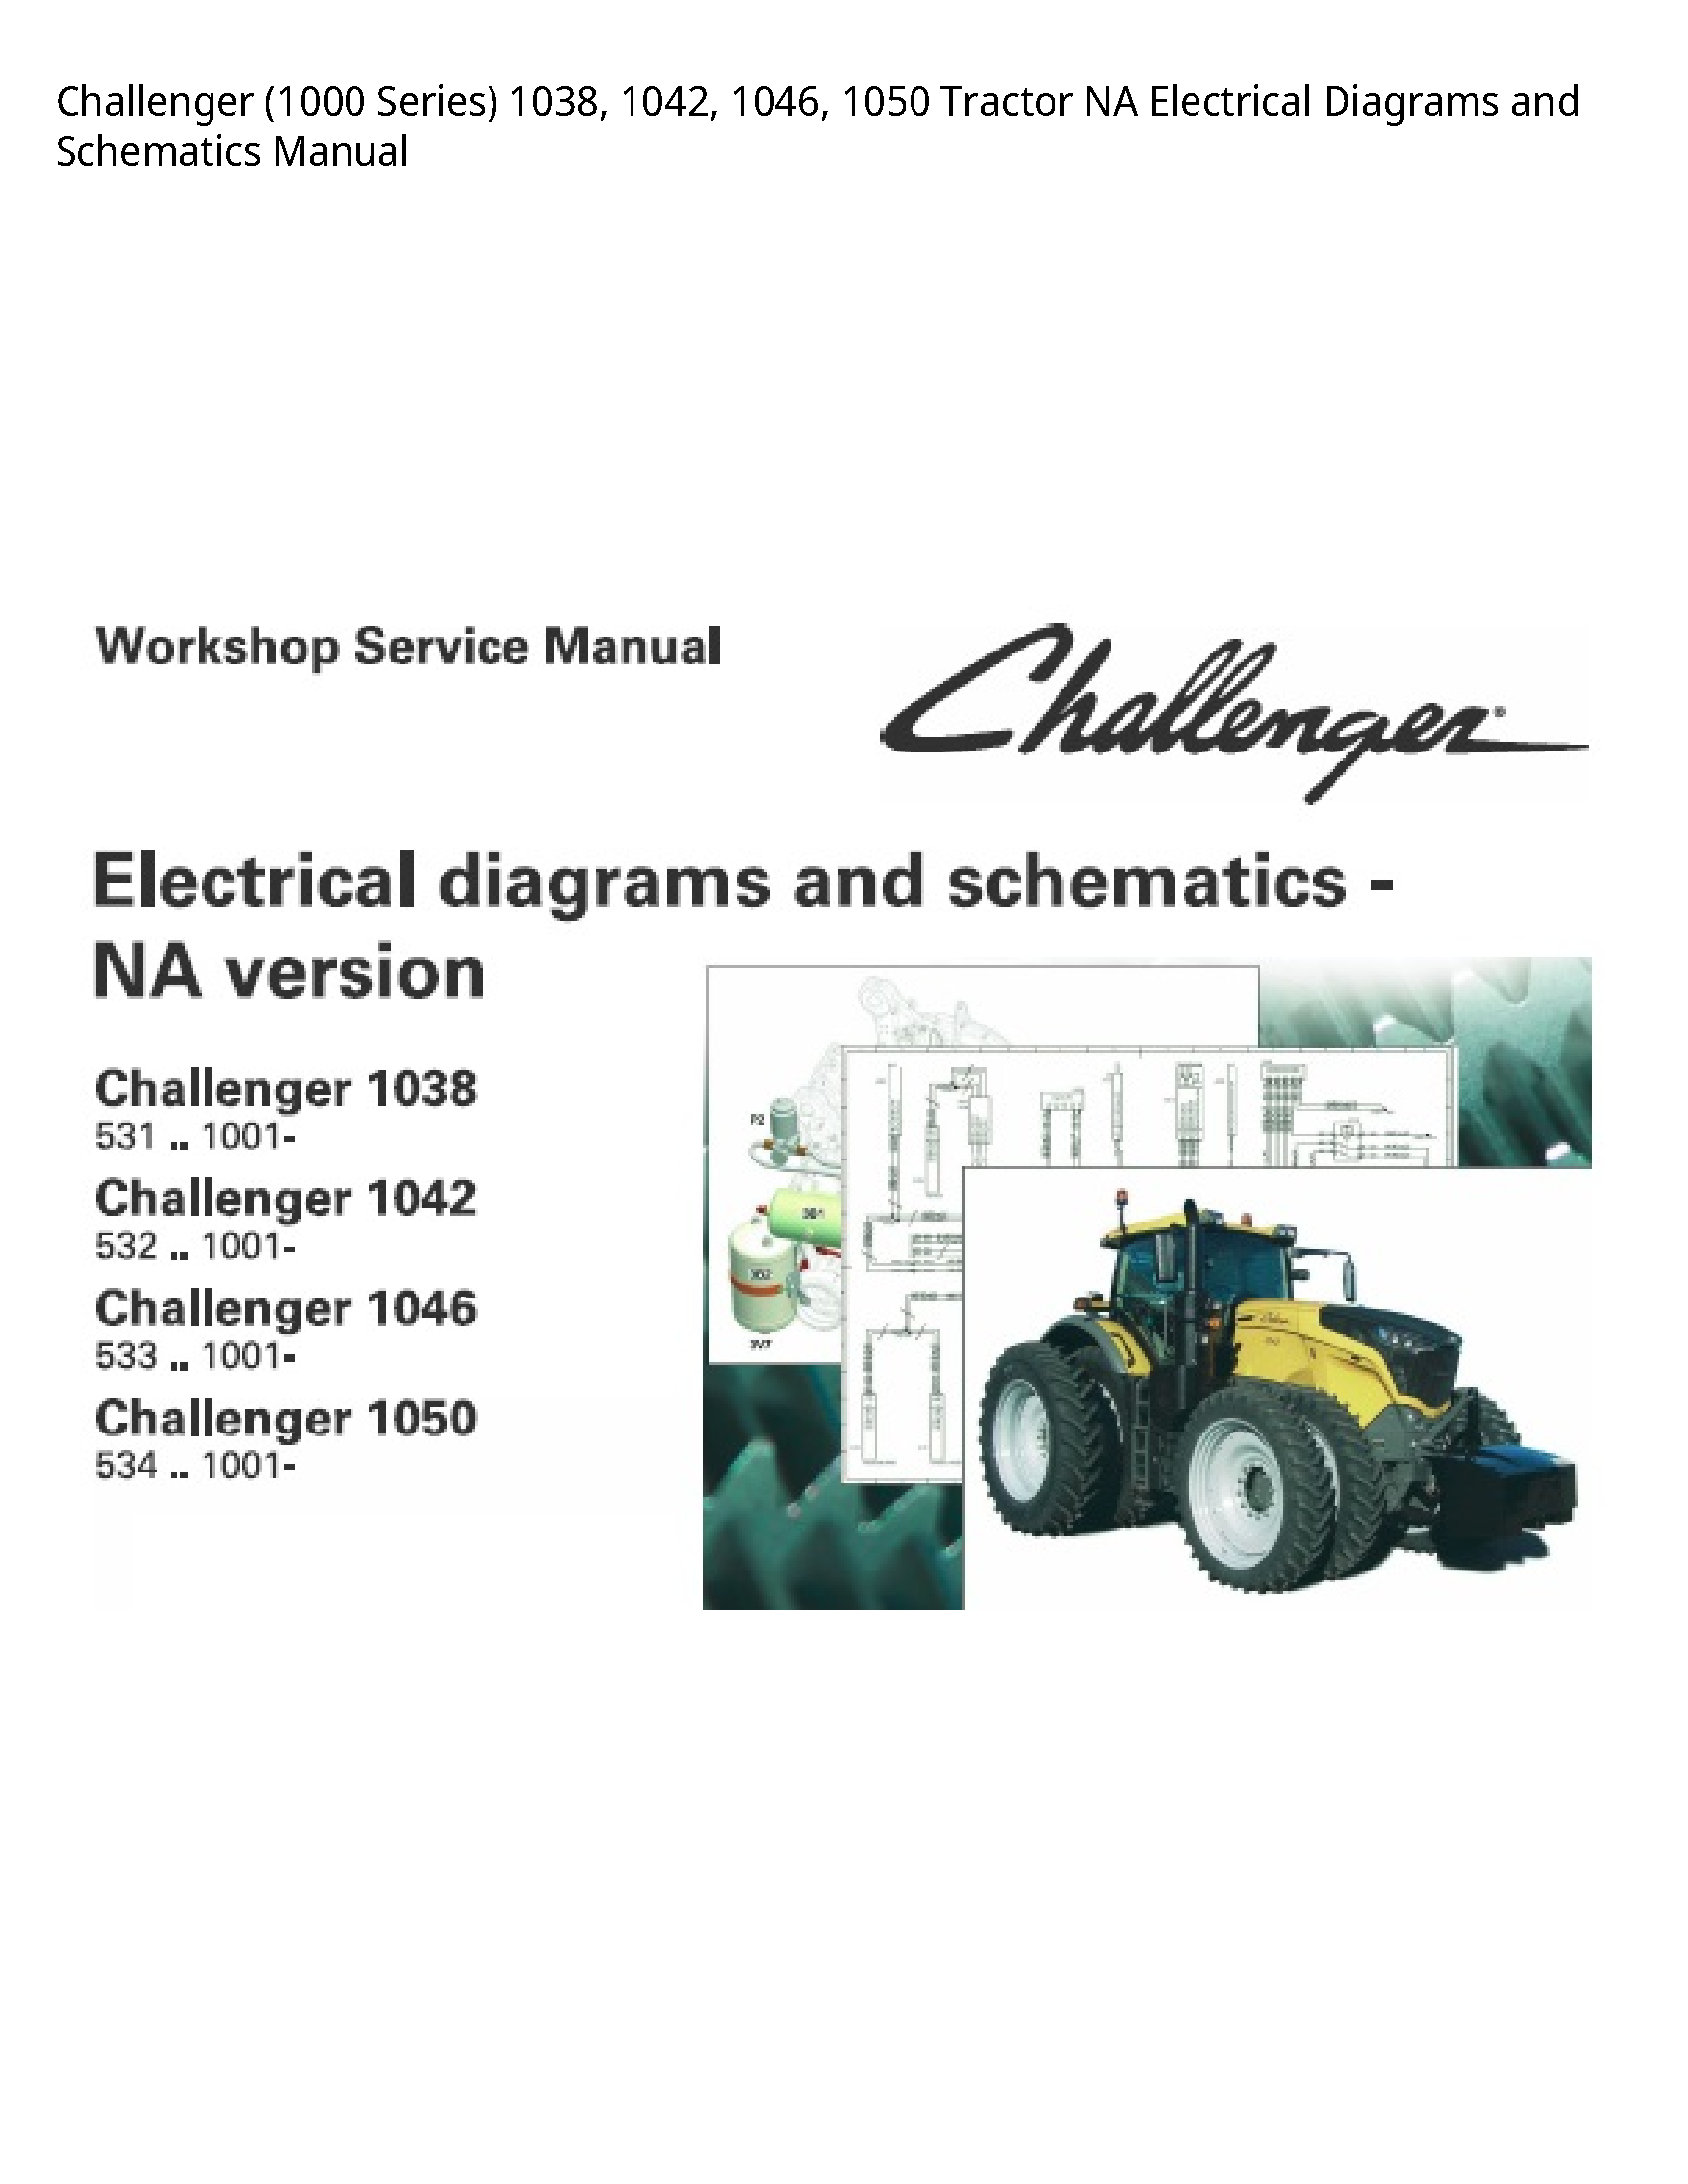 Challenger (1000 Series) Tractor NA Electrical Diagrams  Schematics manual